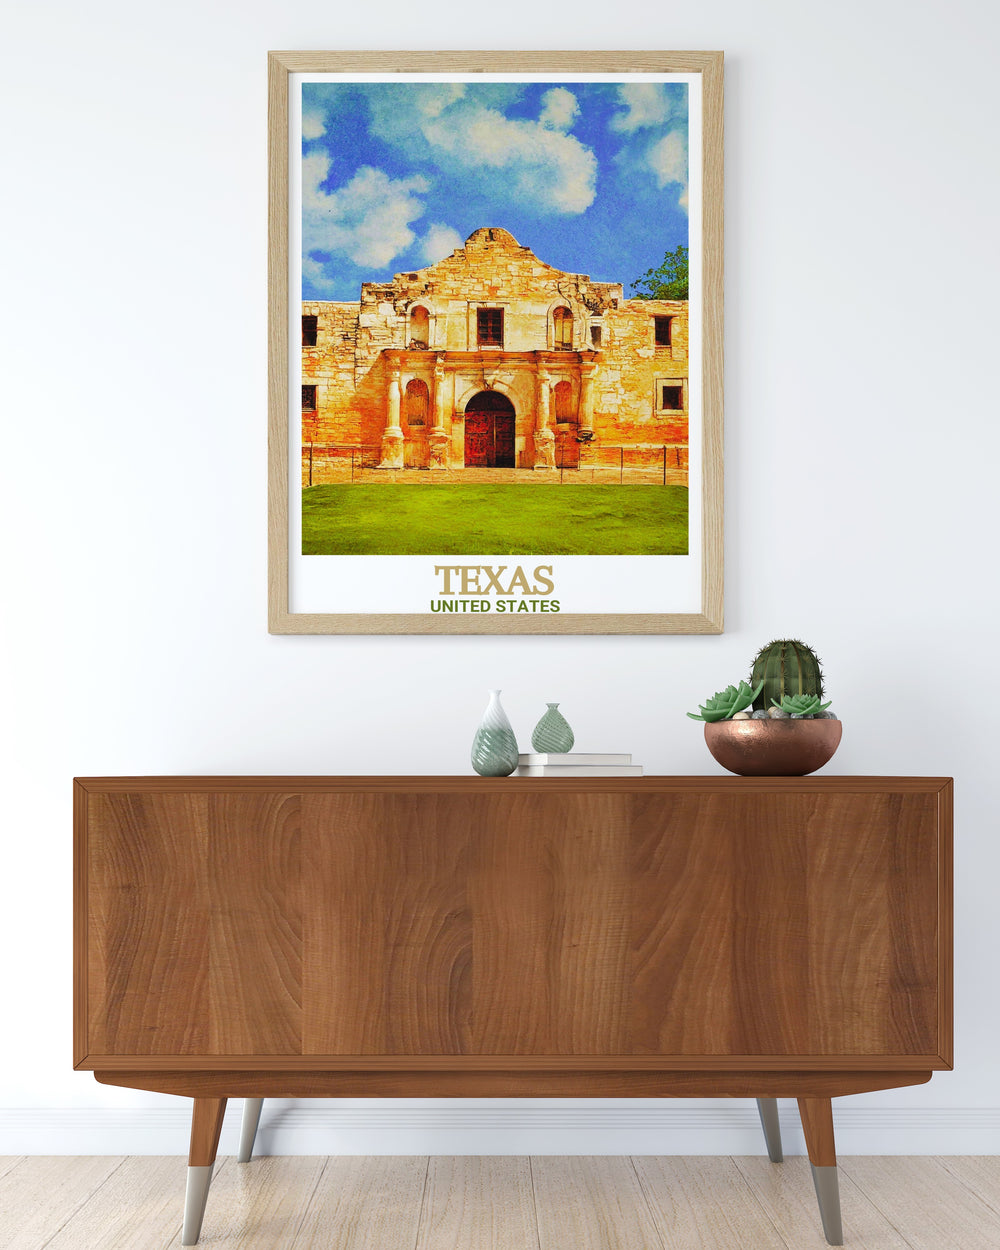 Vintage Travel Print of Guadalupe Mountains National Park. El Capitan Texas and Guadalupe Peak are prominently displayed. Enhance your space with the stunning artwork that also features elements from The Alamo.